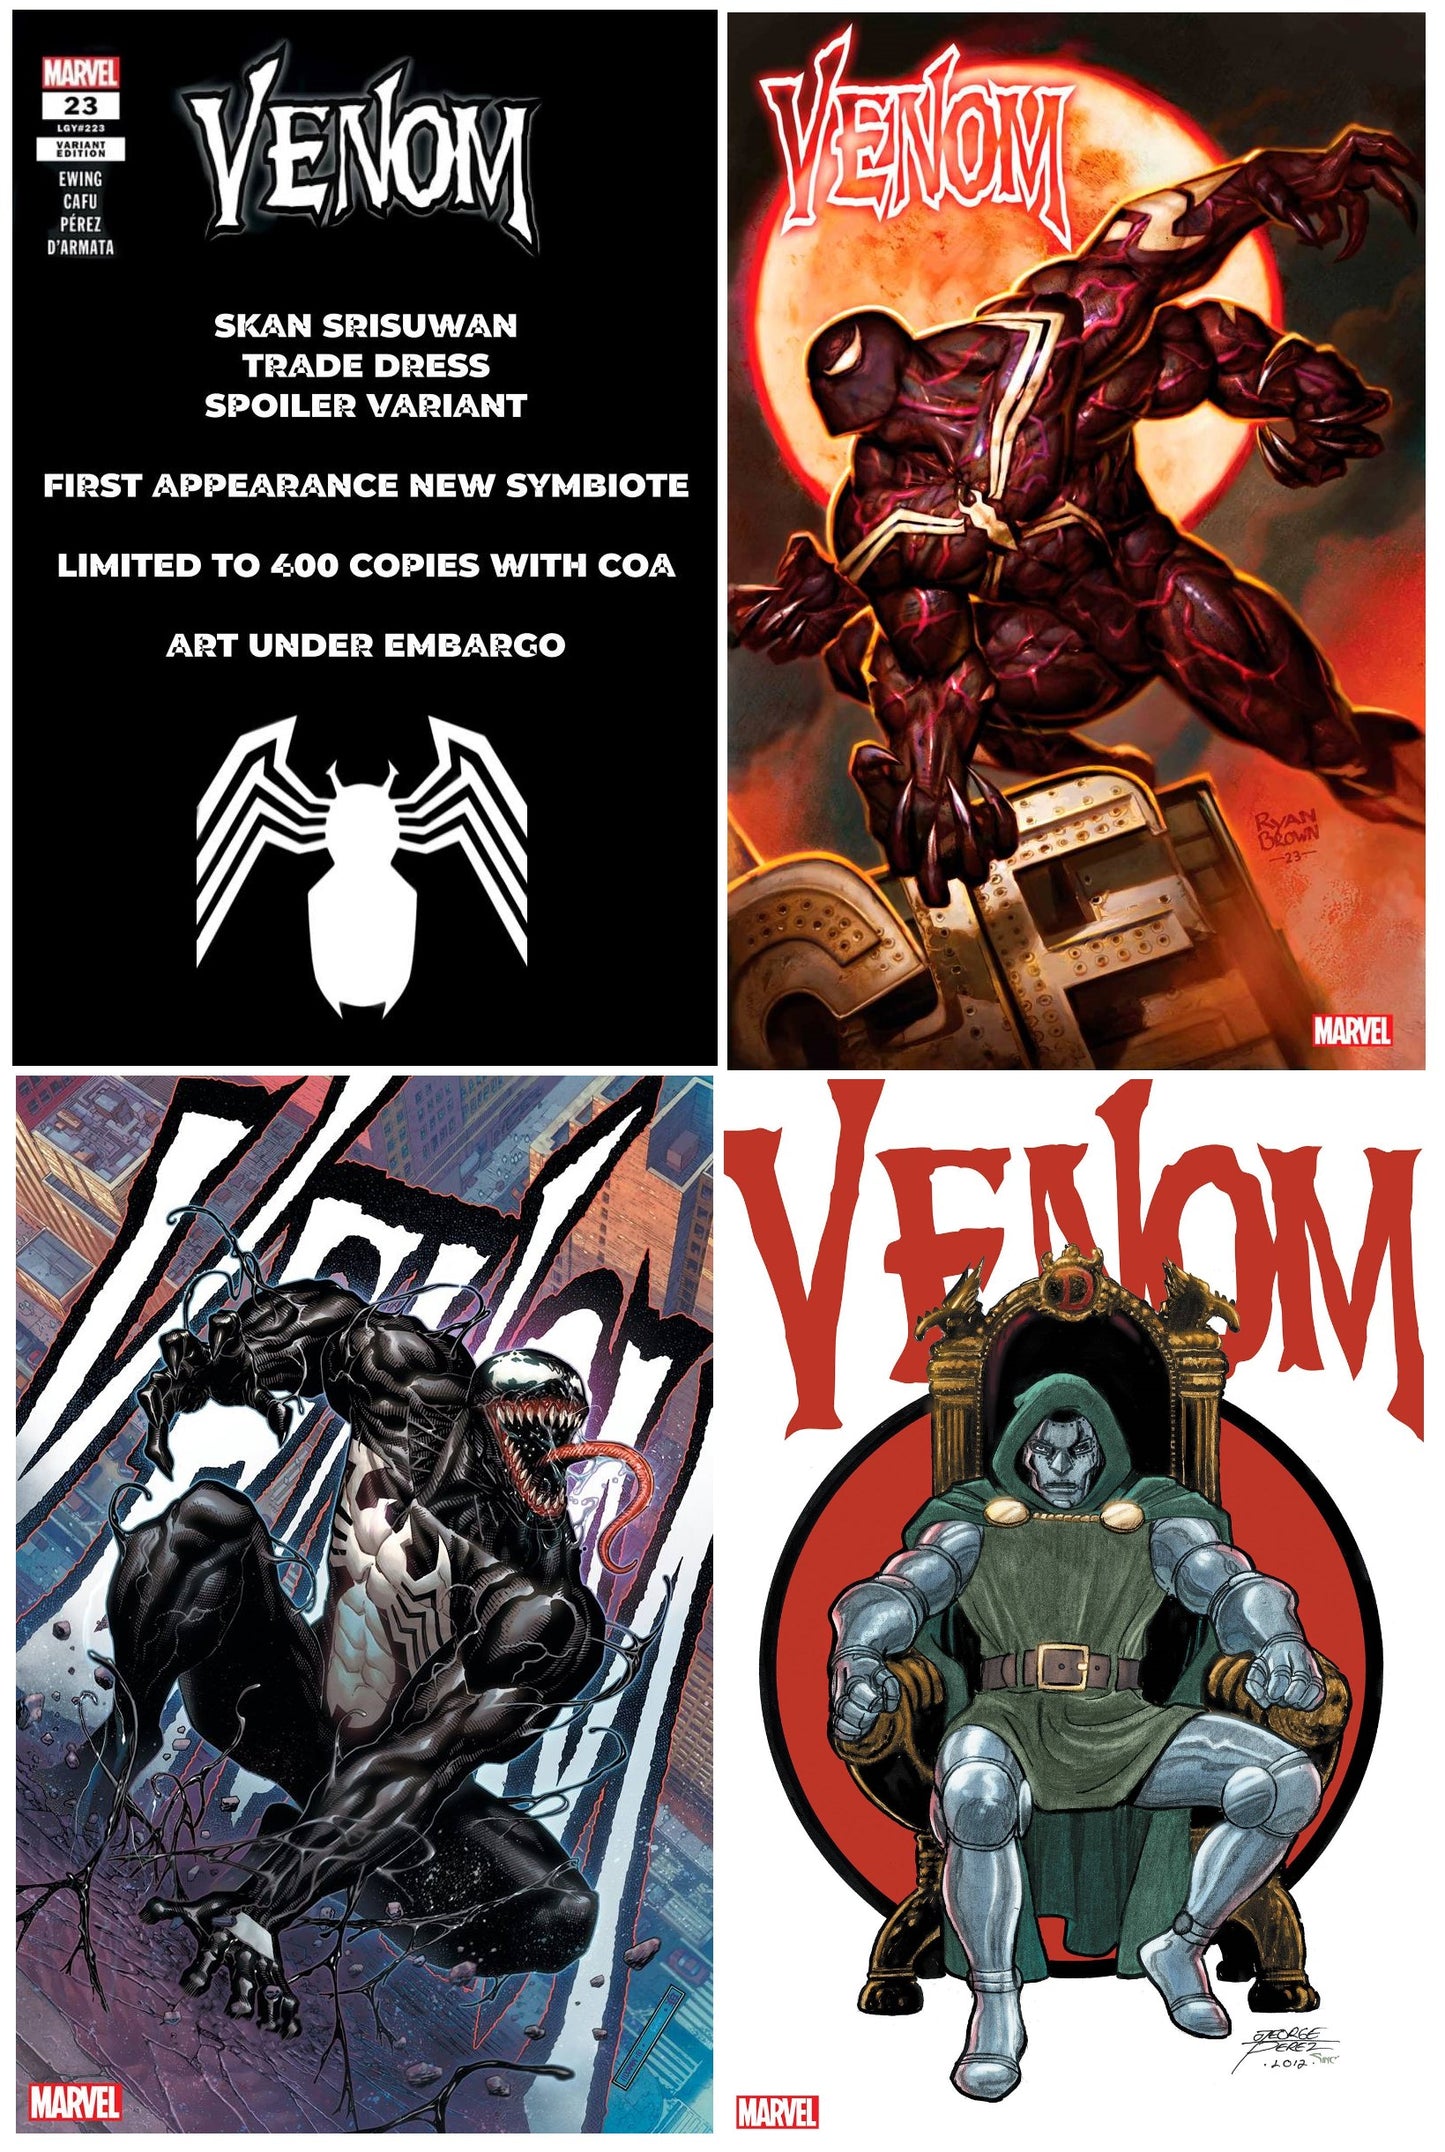 VENOM #23 SKAN SRISUWAN SPOILER VARIANT LIMITED TO 400 COPIES WITH NUMBRED COA + 1:25, 1:50 & 1:100 VARIANT